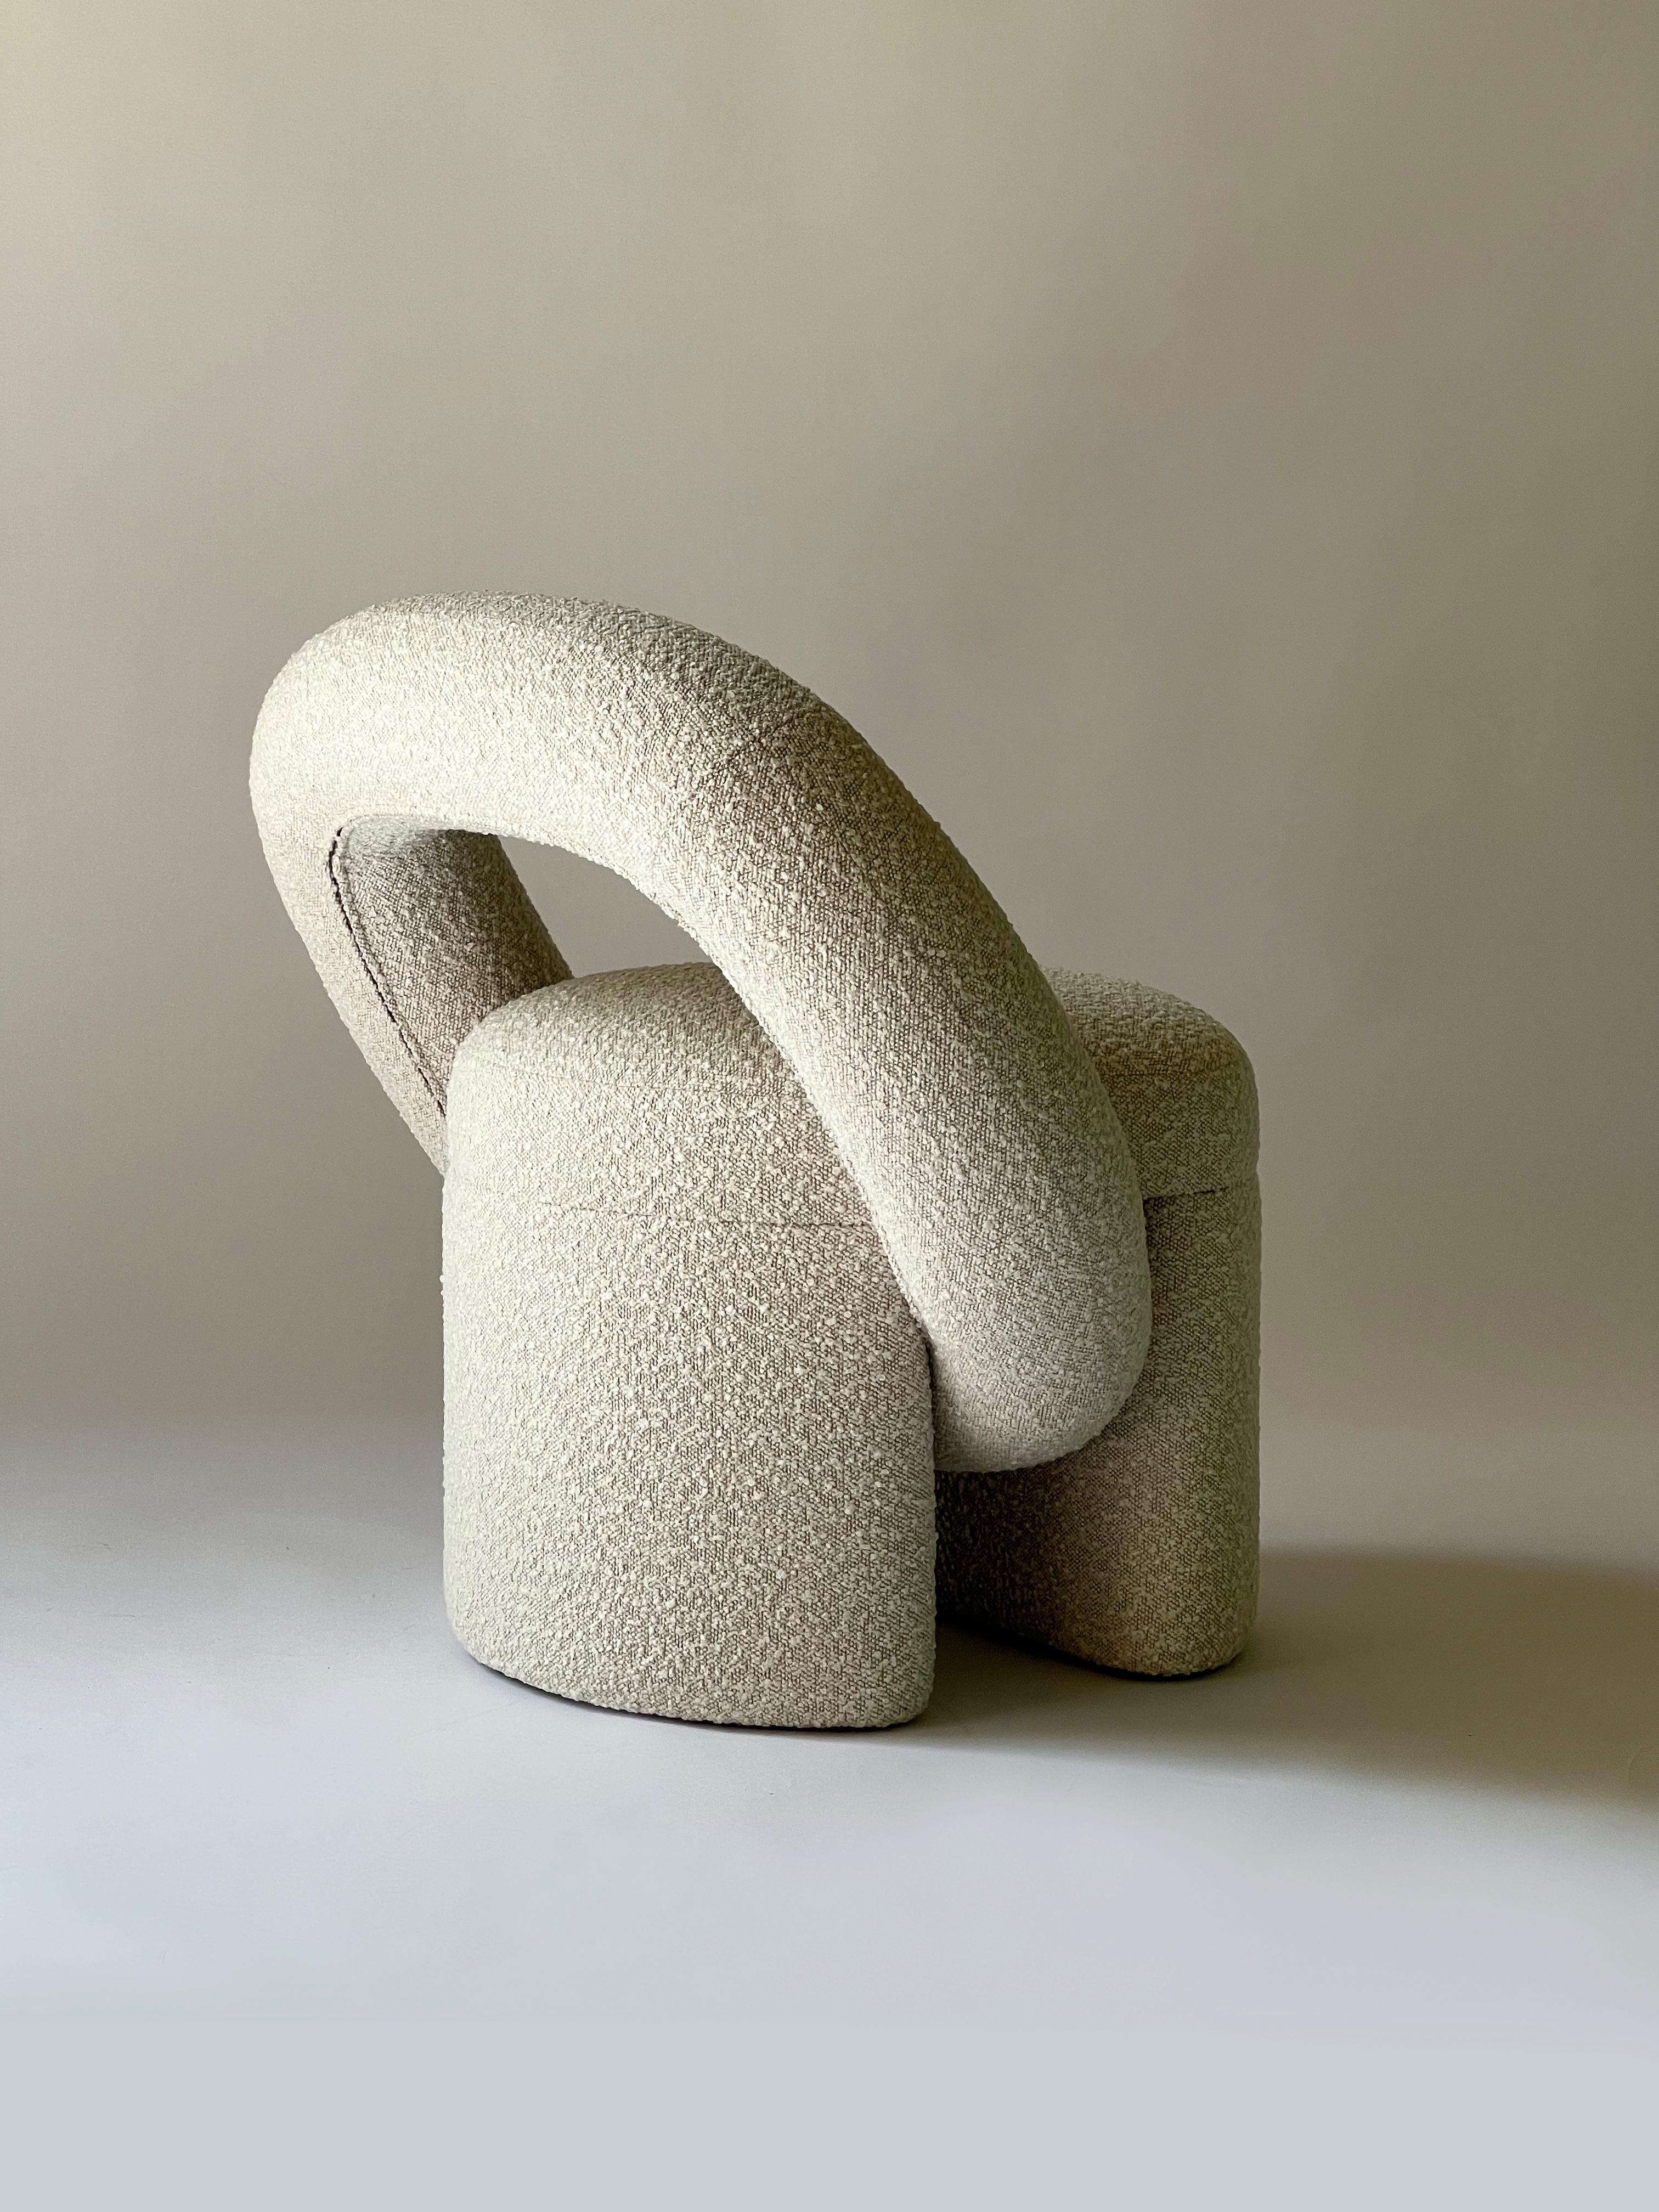 “PLAY” armchair has an unusual shape that was assembled from several geometric elements. The bagel-shaped detail serves the back of the chair.
Handcrafted in Ukraine, this armchair embodies the perfect blend of comfort and style. Its sleek design